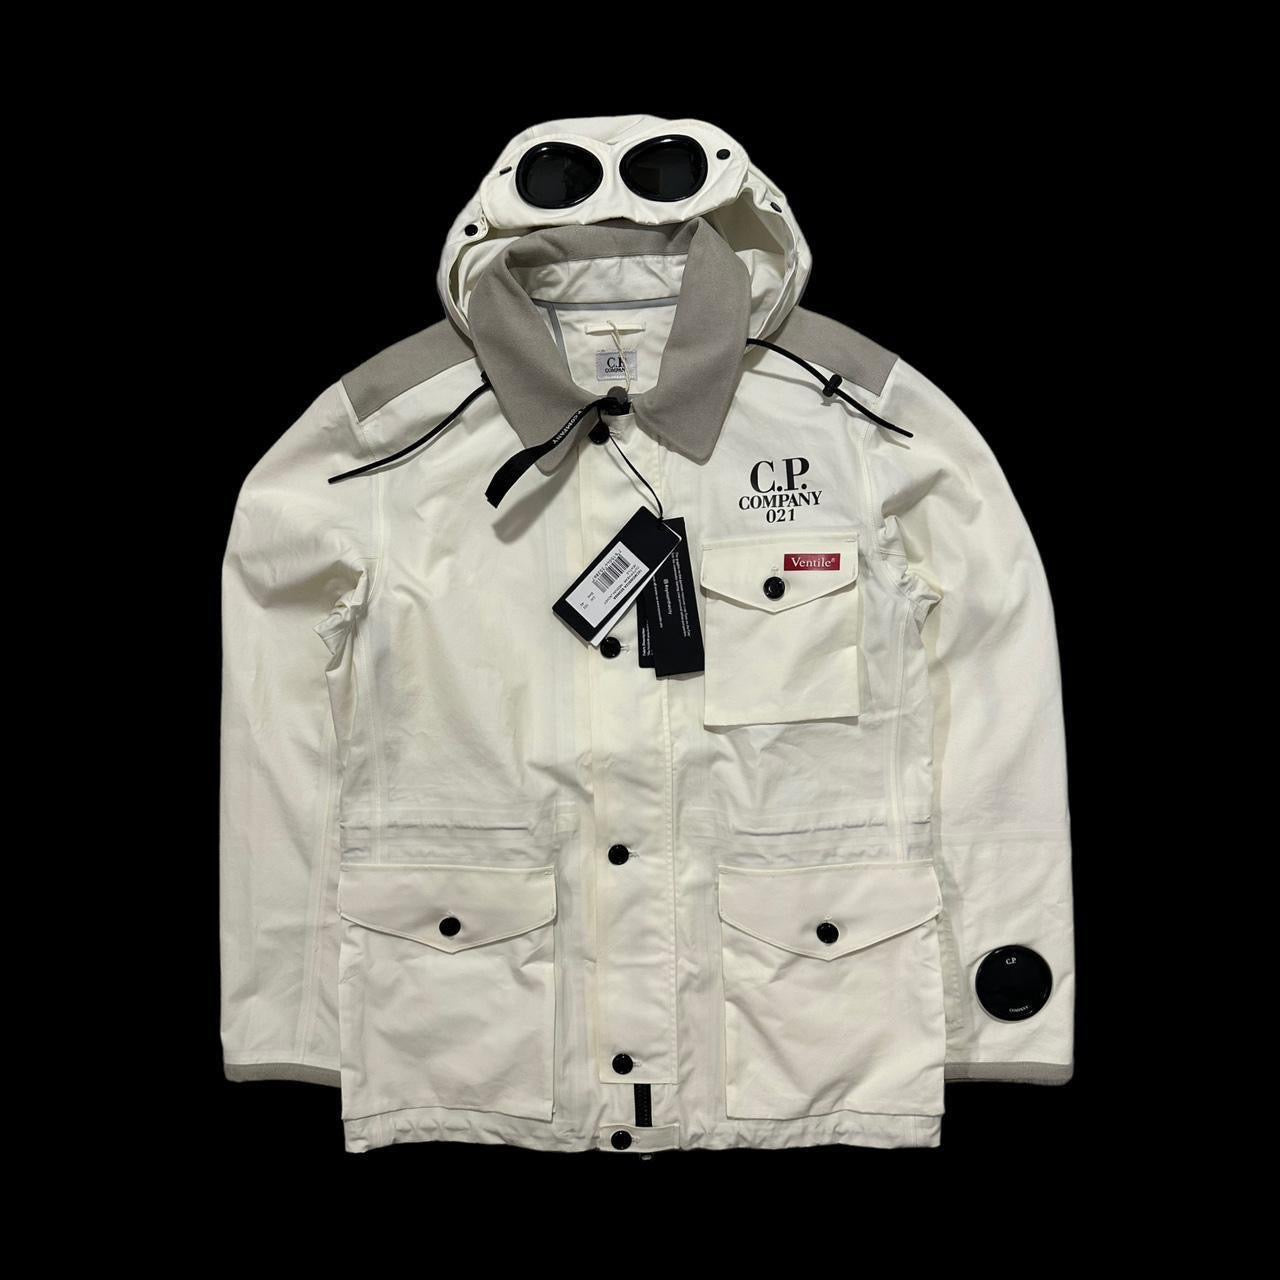 CP Company Ventile La Mille Goggle Jacket with Watch viewer Lens